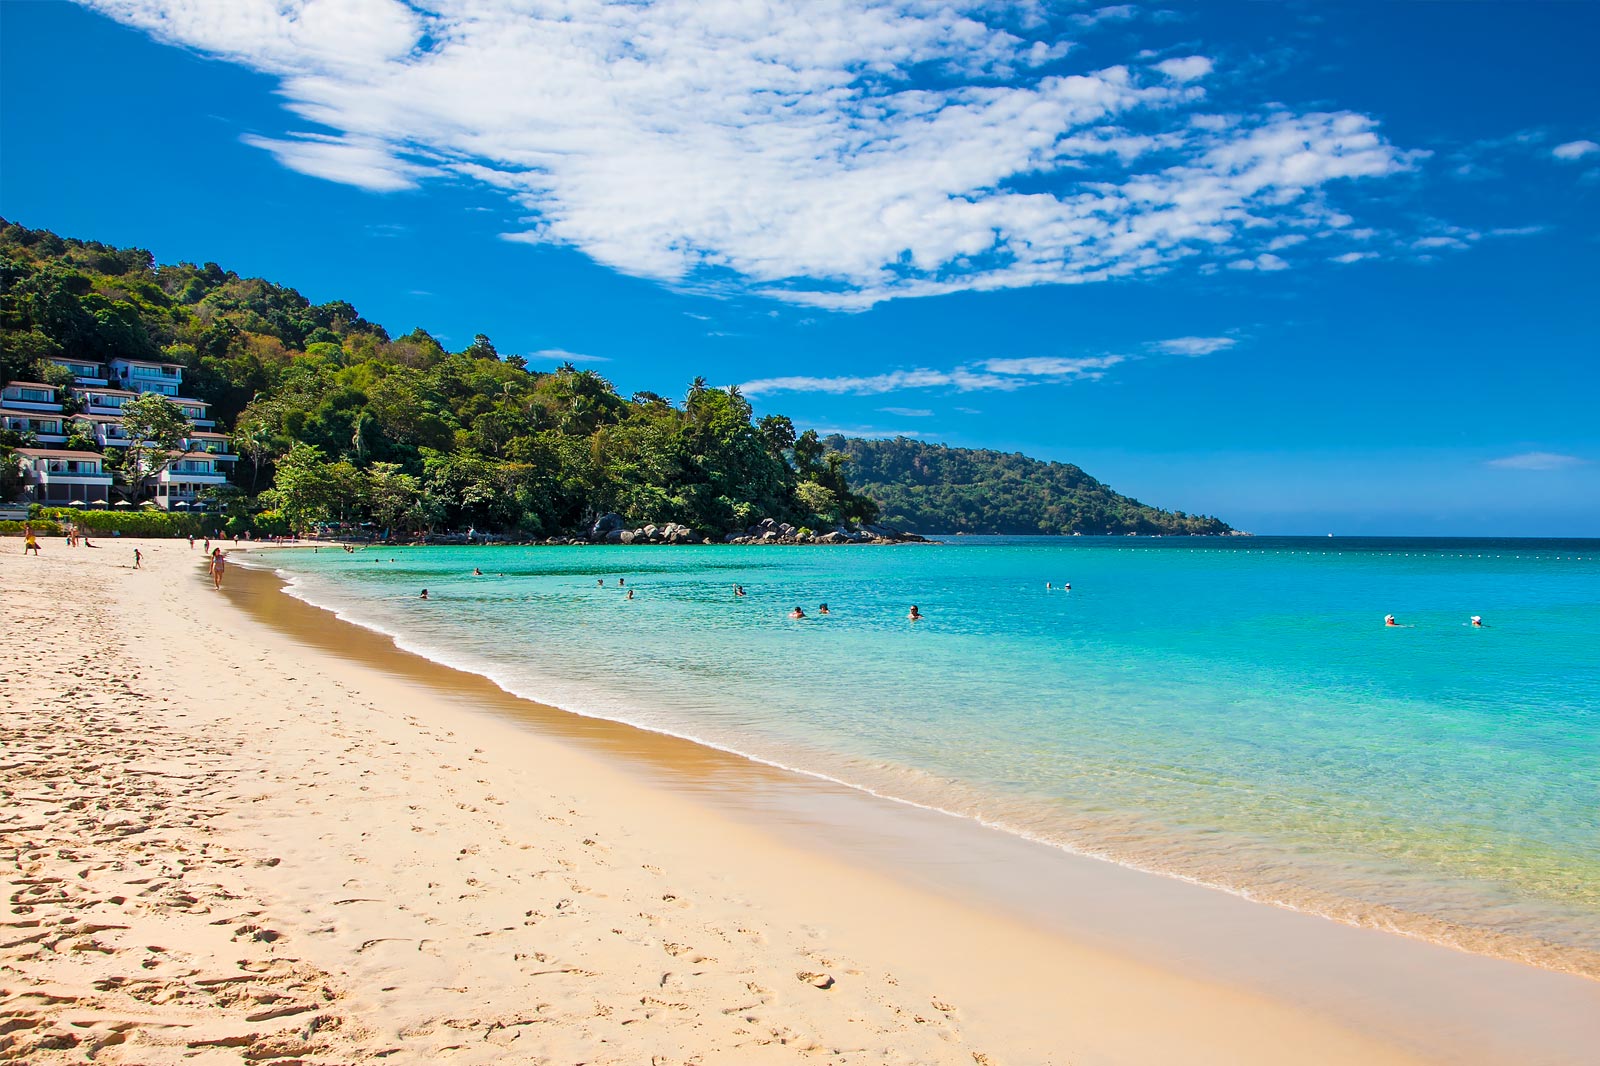 Relax and Enjoy the Beach in Phuket: A Tropical Paradise